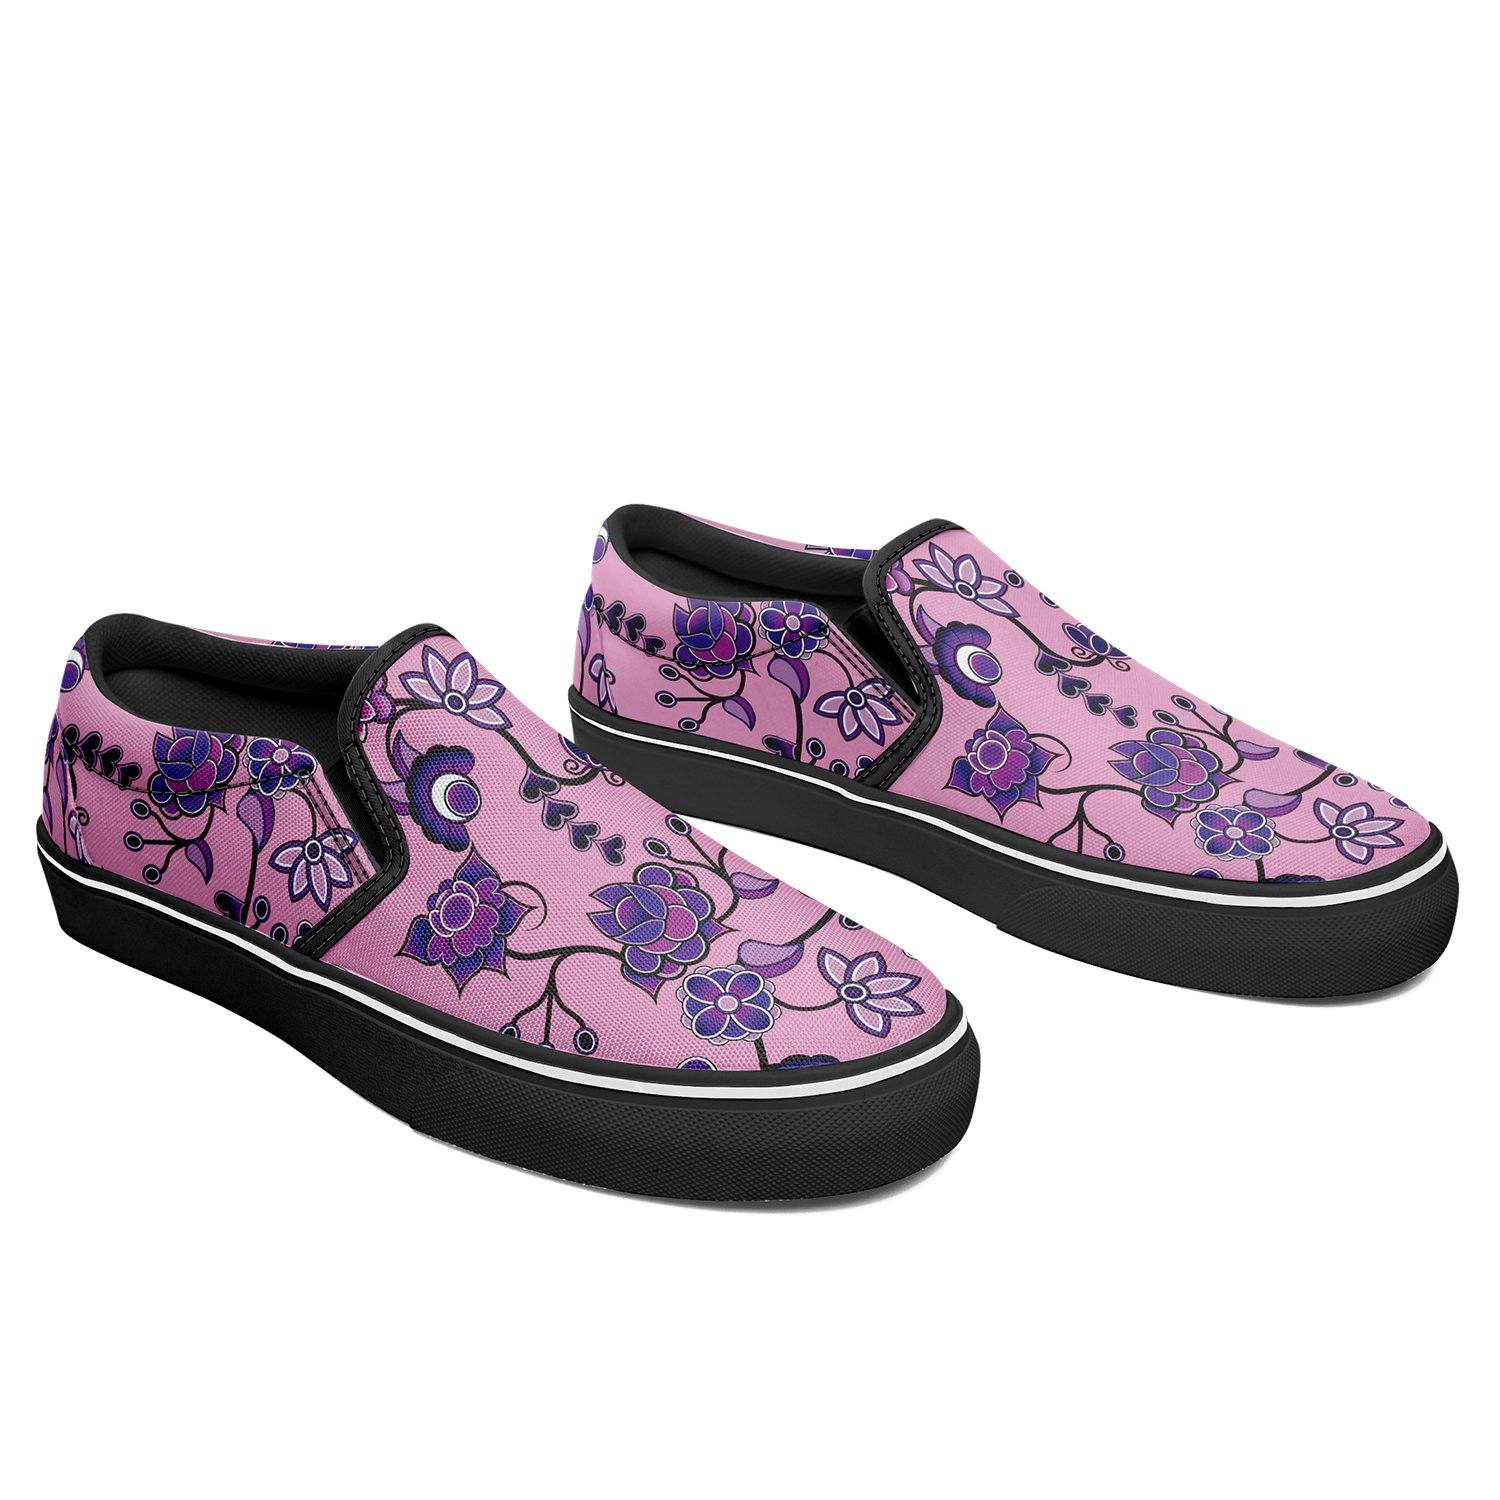 Purple Floral Amour Otoyimm Canvas Slip On Shoes otoyimm Herman 